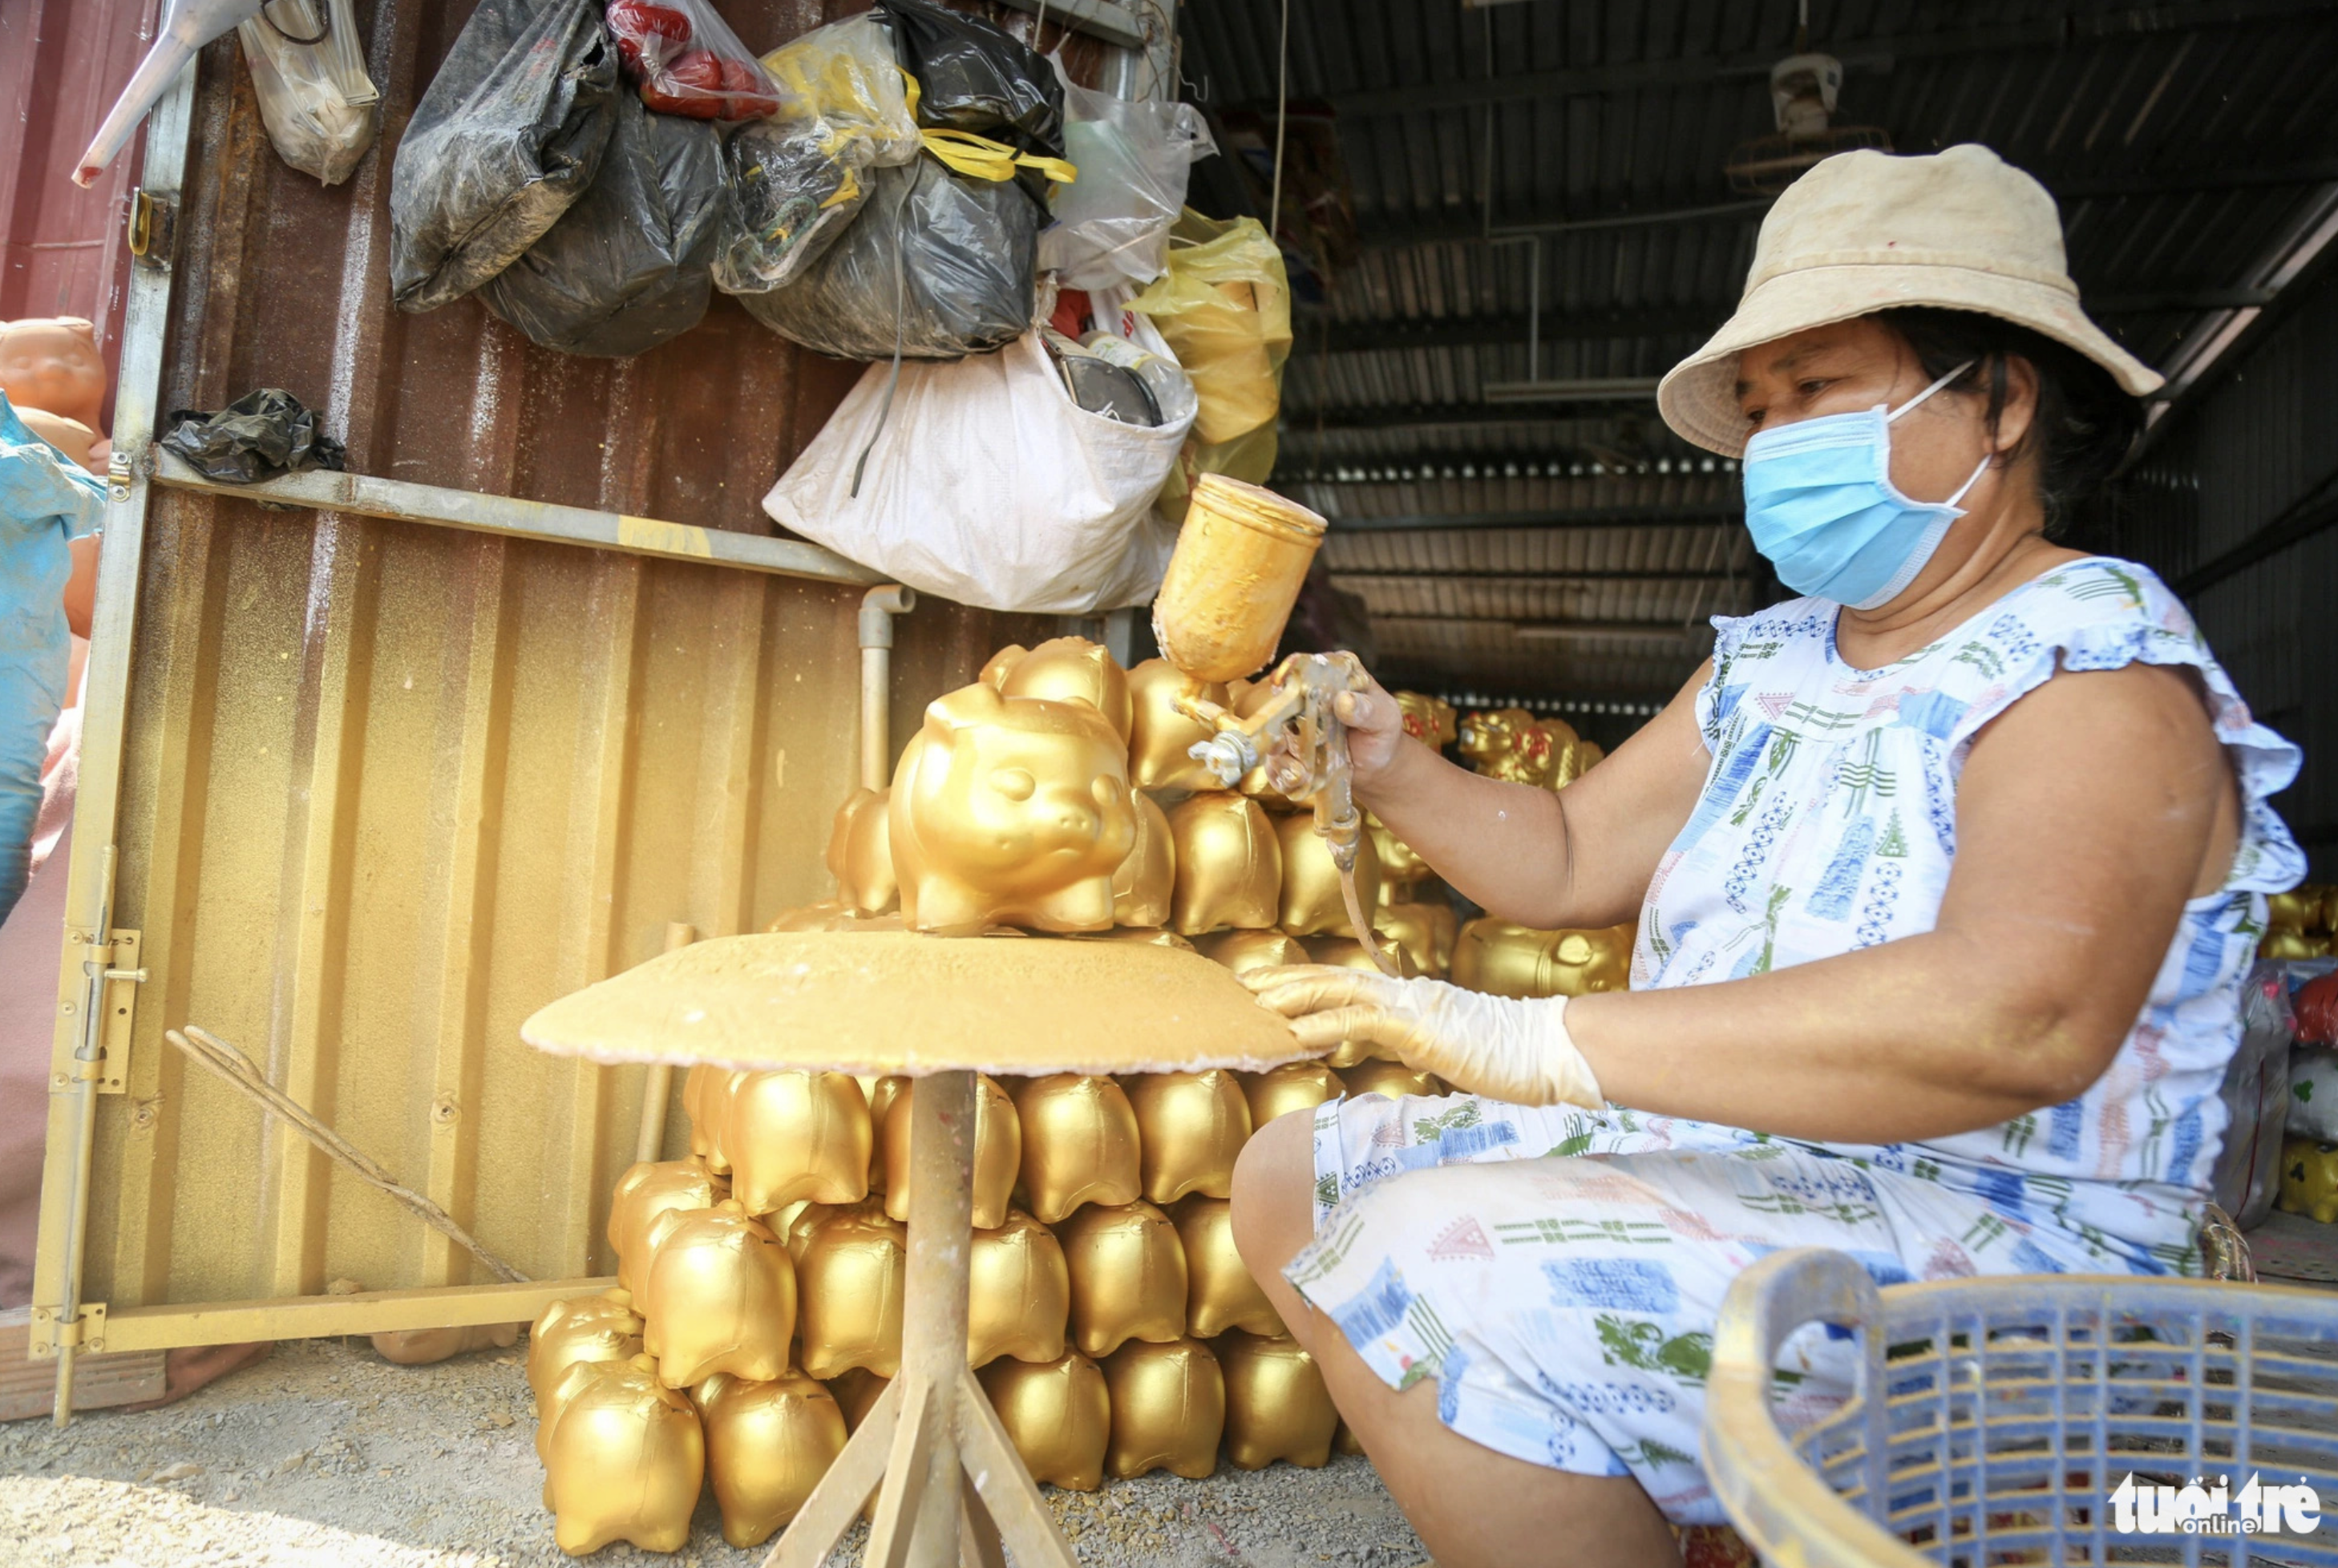 Thu Suong, an artisan of making piggy banks in the Lai Thieu Village in Binh Duong Province, southern Vietnam, said that she will continue following the craft to preserve the inherited career, and bring Tet vibes to everyone through sophisticated products. Photo: P.Q. / Tuoi Tre